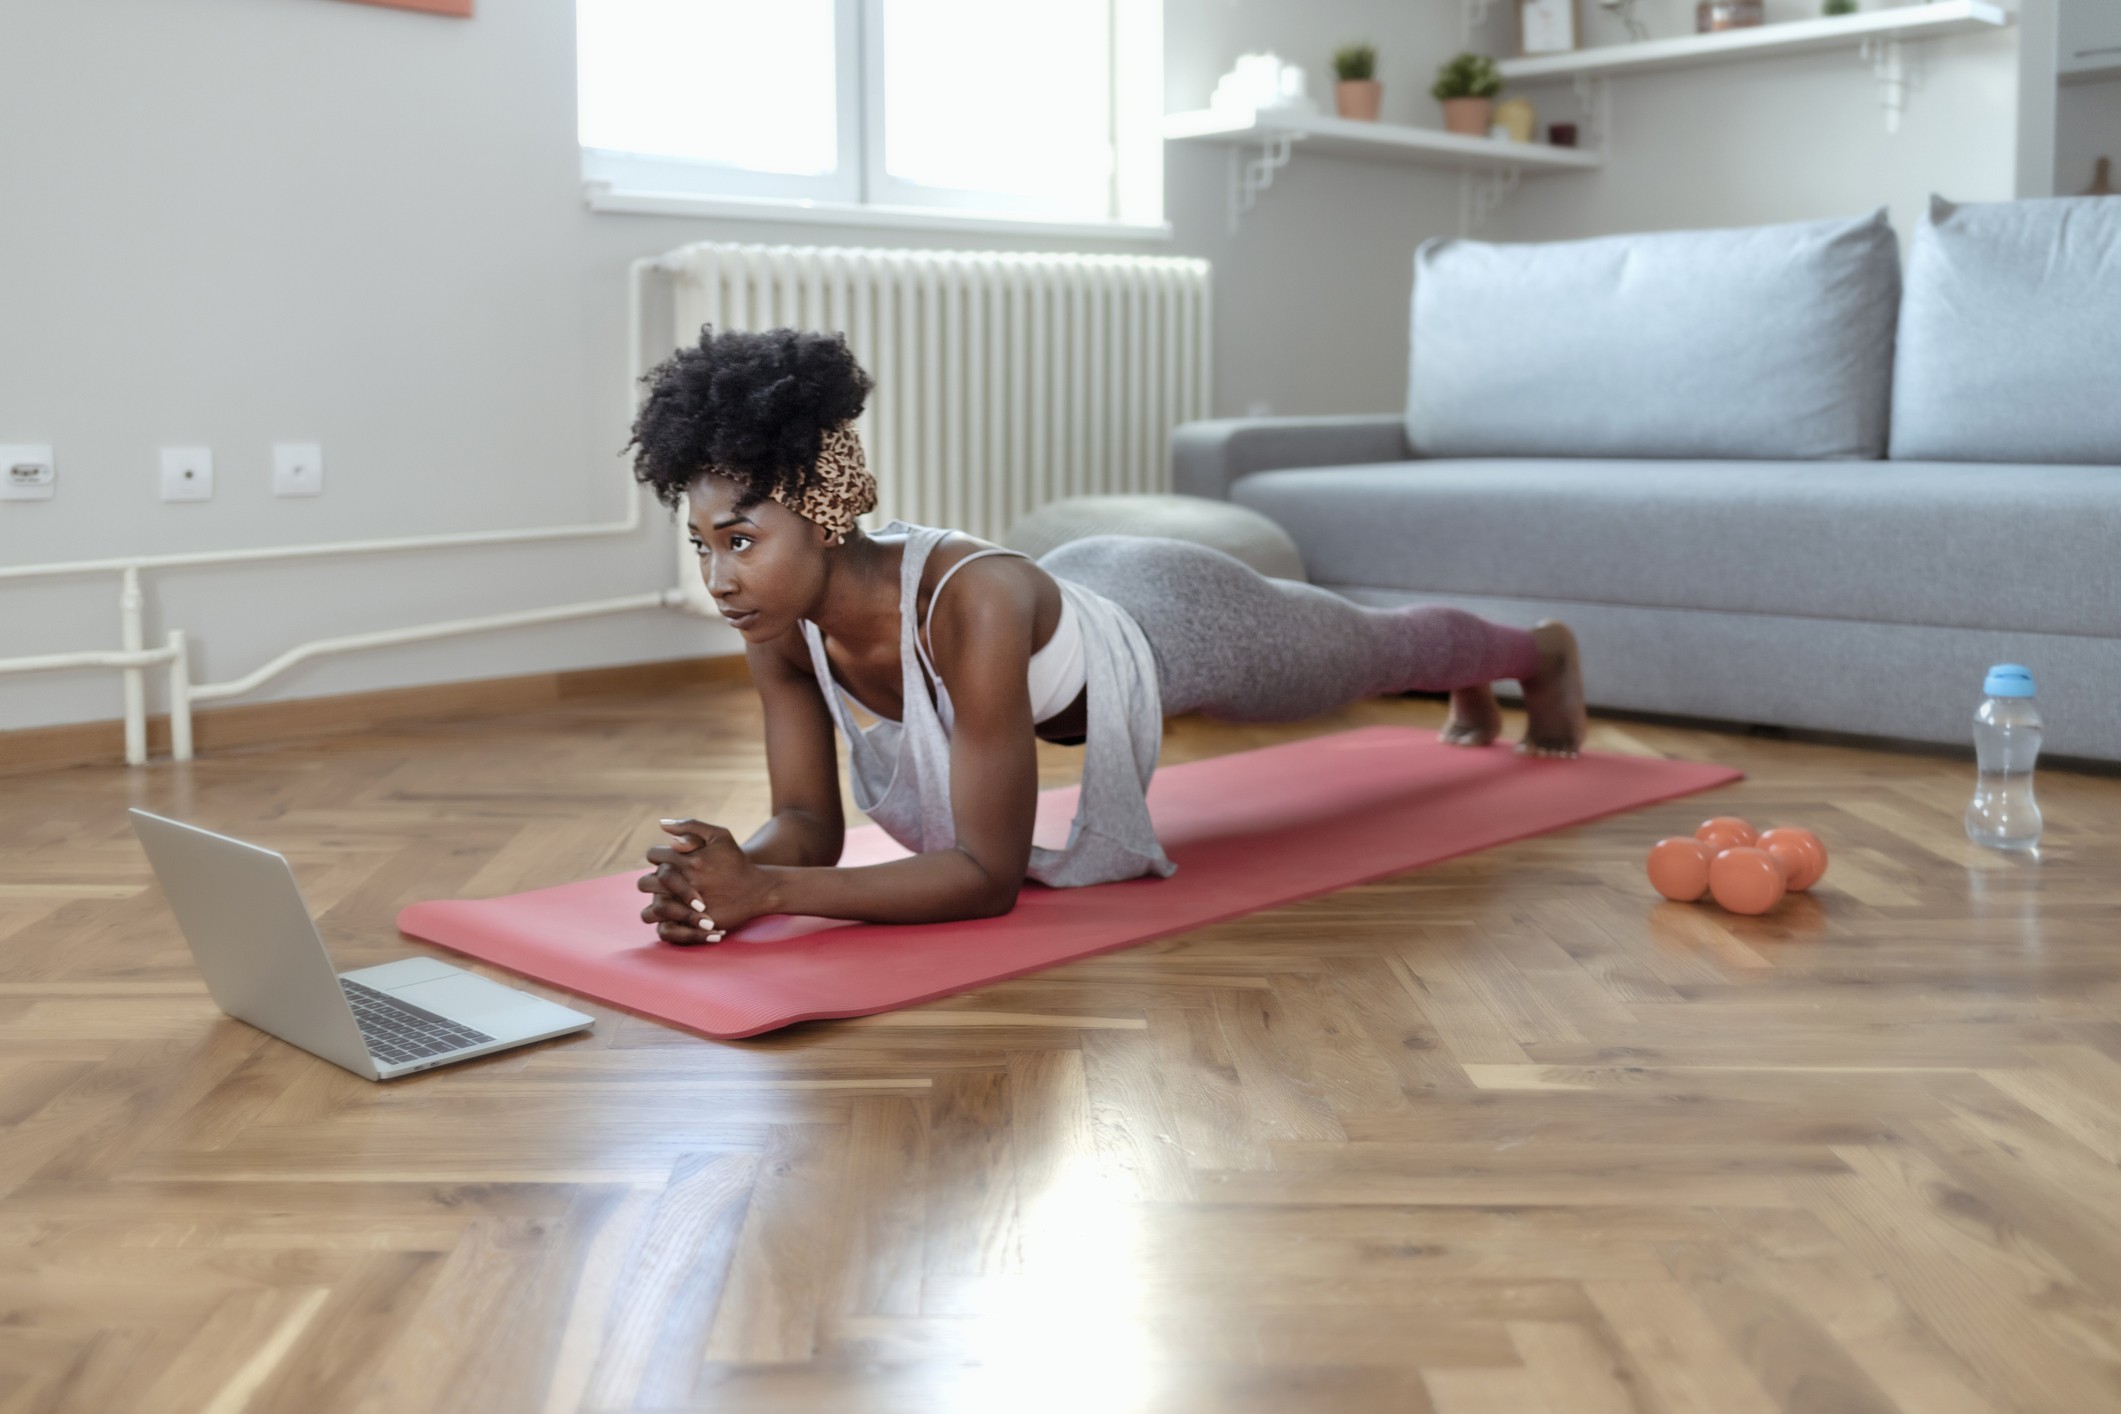 15-Minute Pilates Work Out At Home - xoNecole